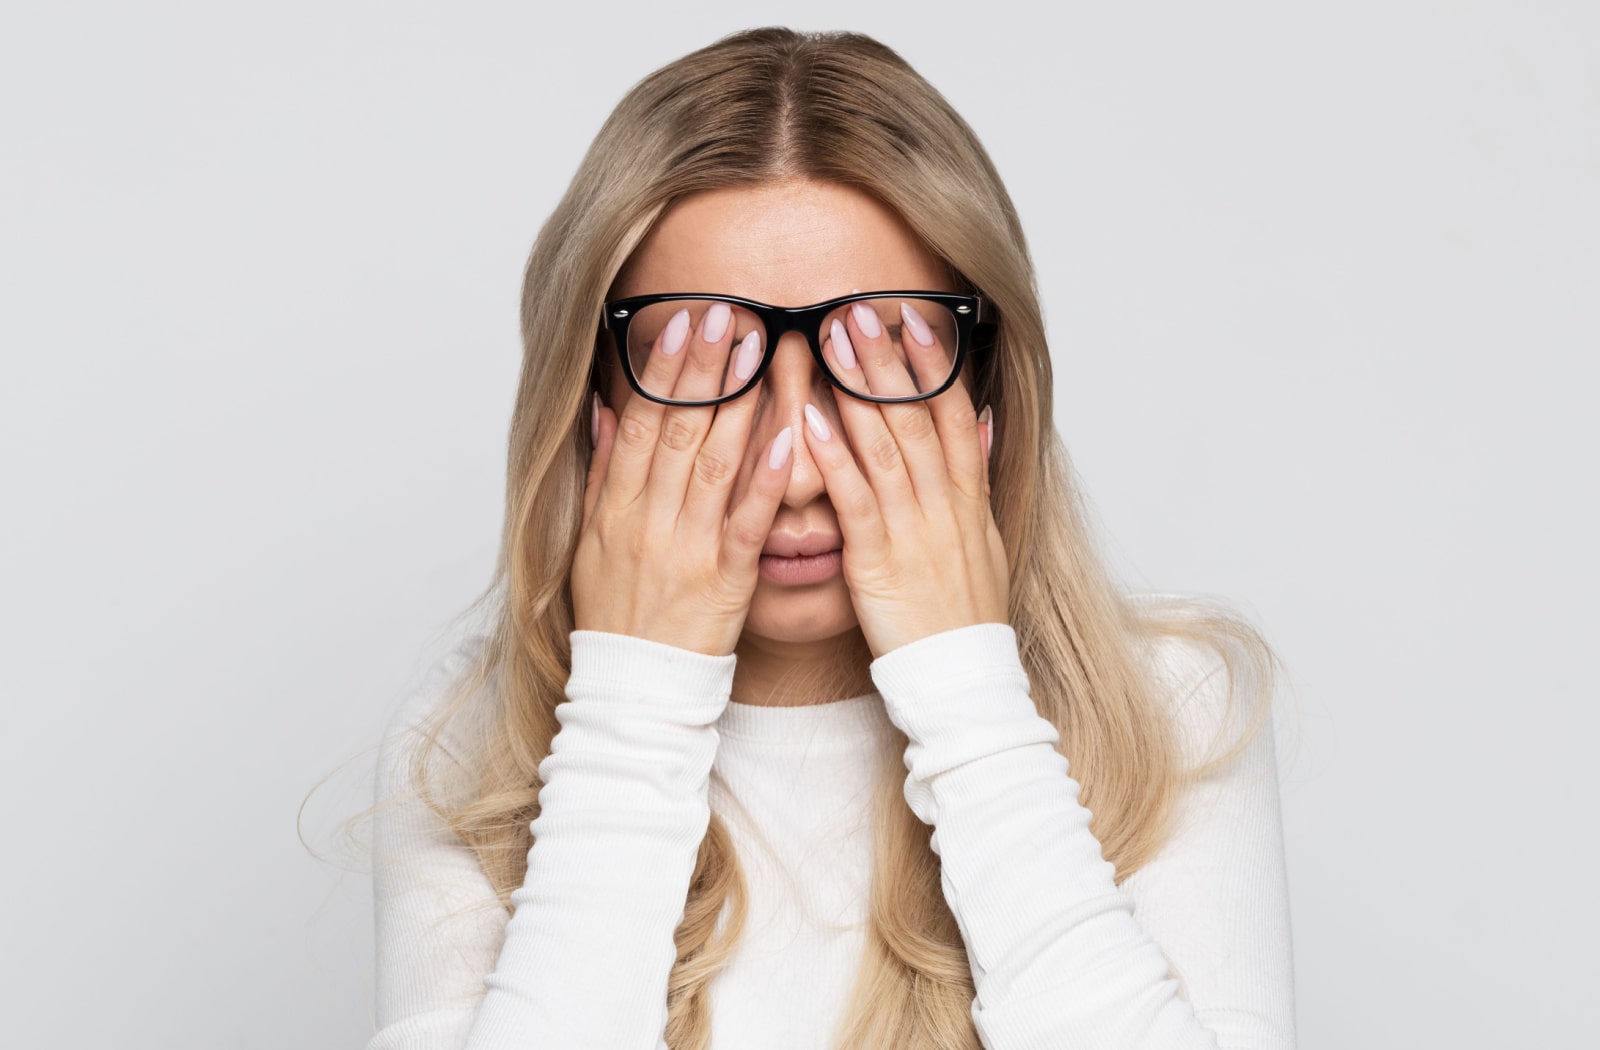 A woman holds both of her hands over her eyes and underneath her glasses due to eye strain